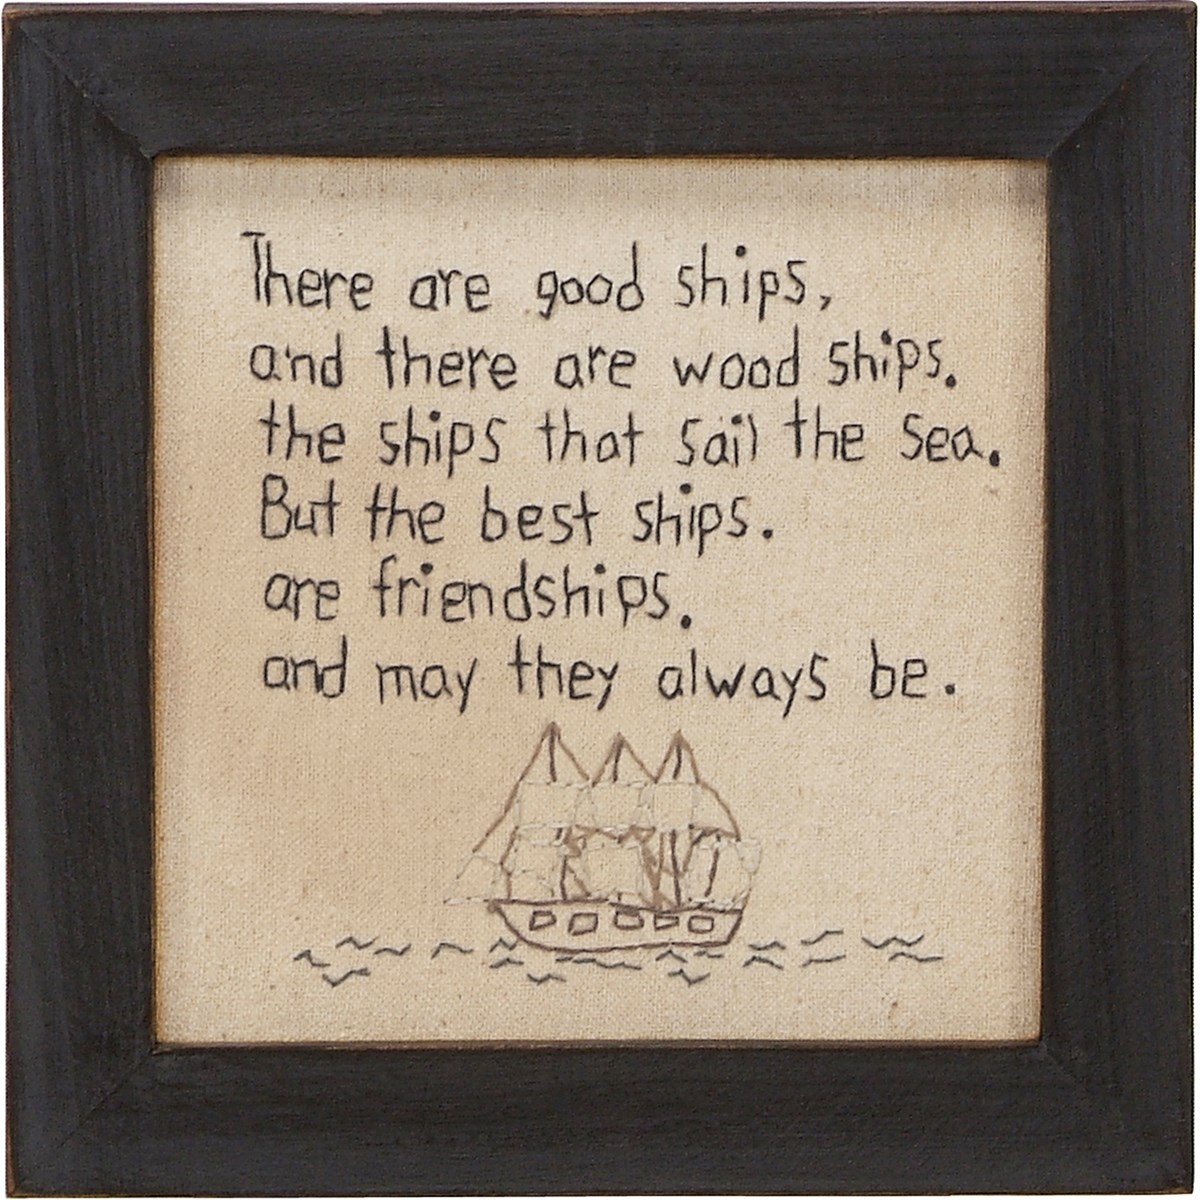 There Are Good Ships Stitchery - Cotton, Wood, Glass